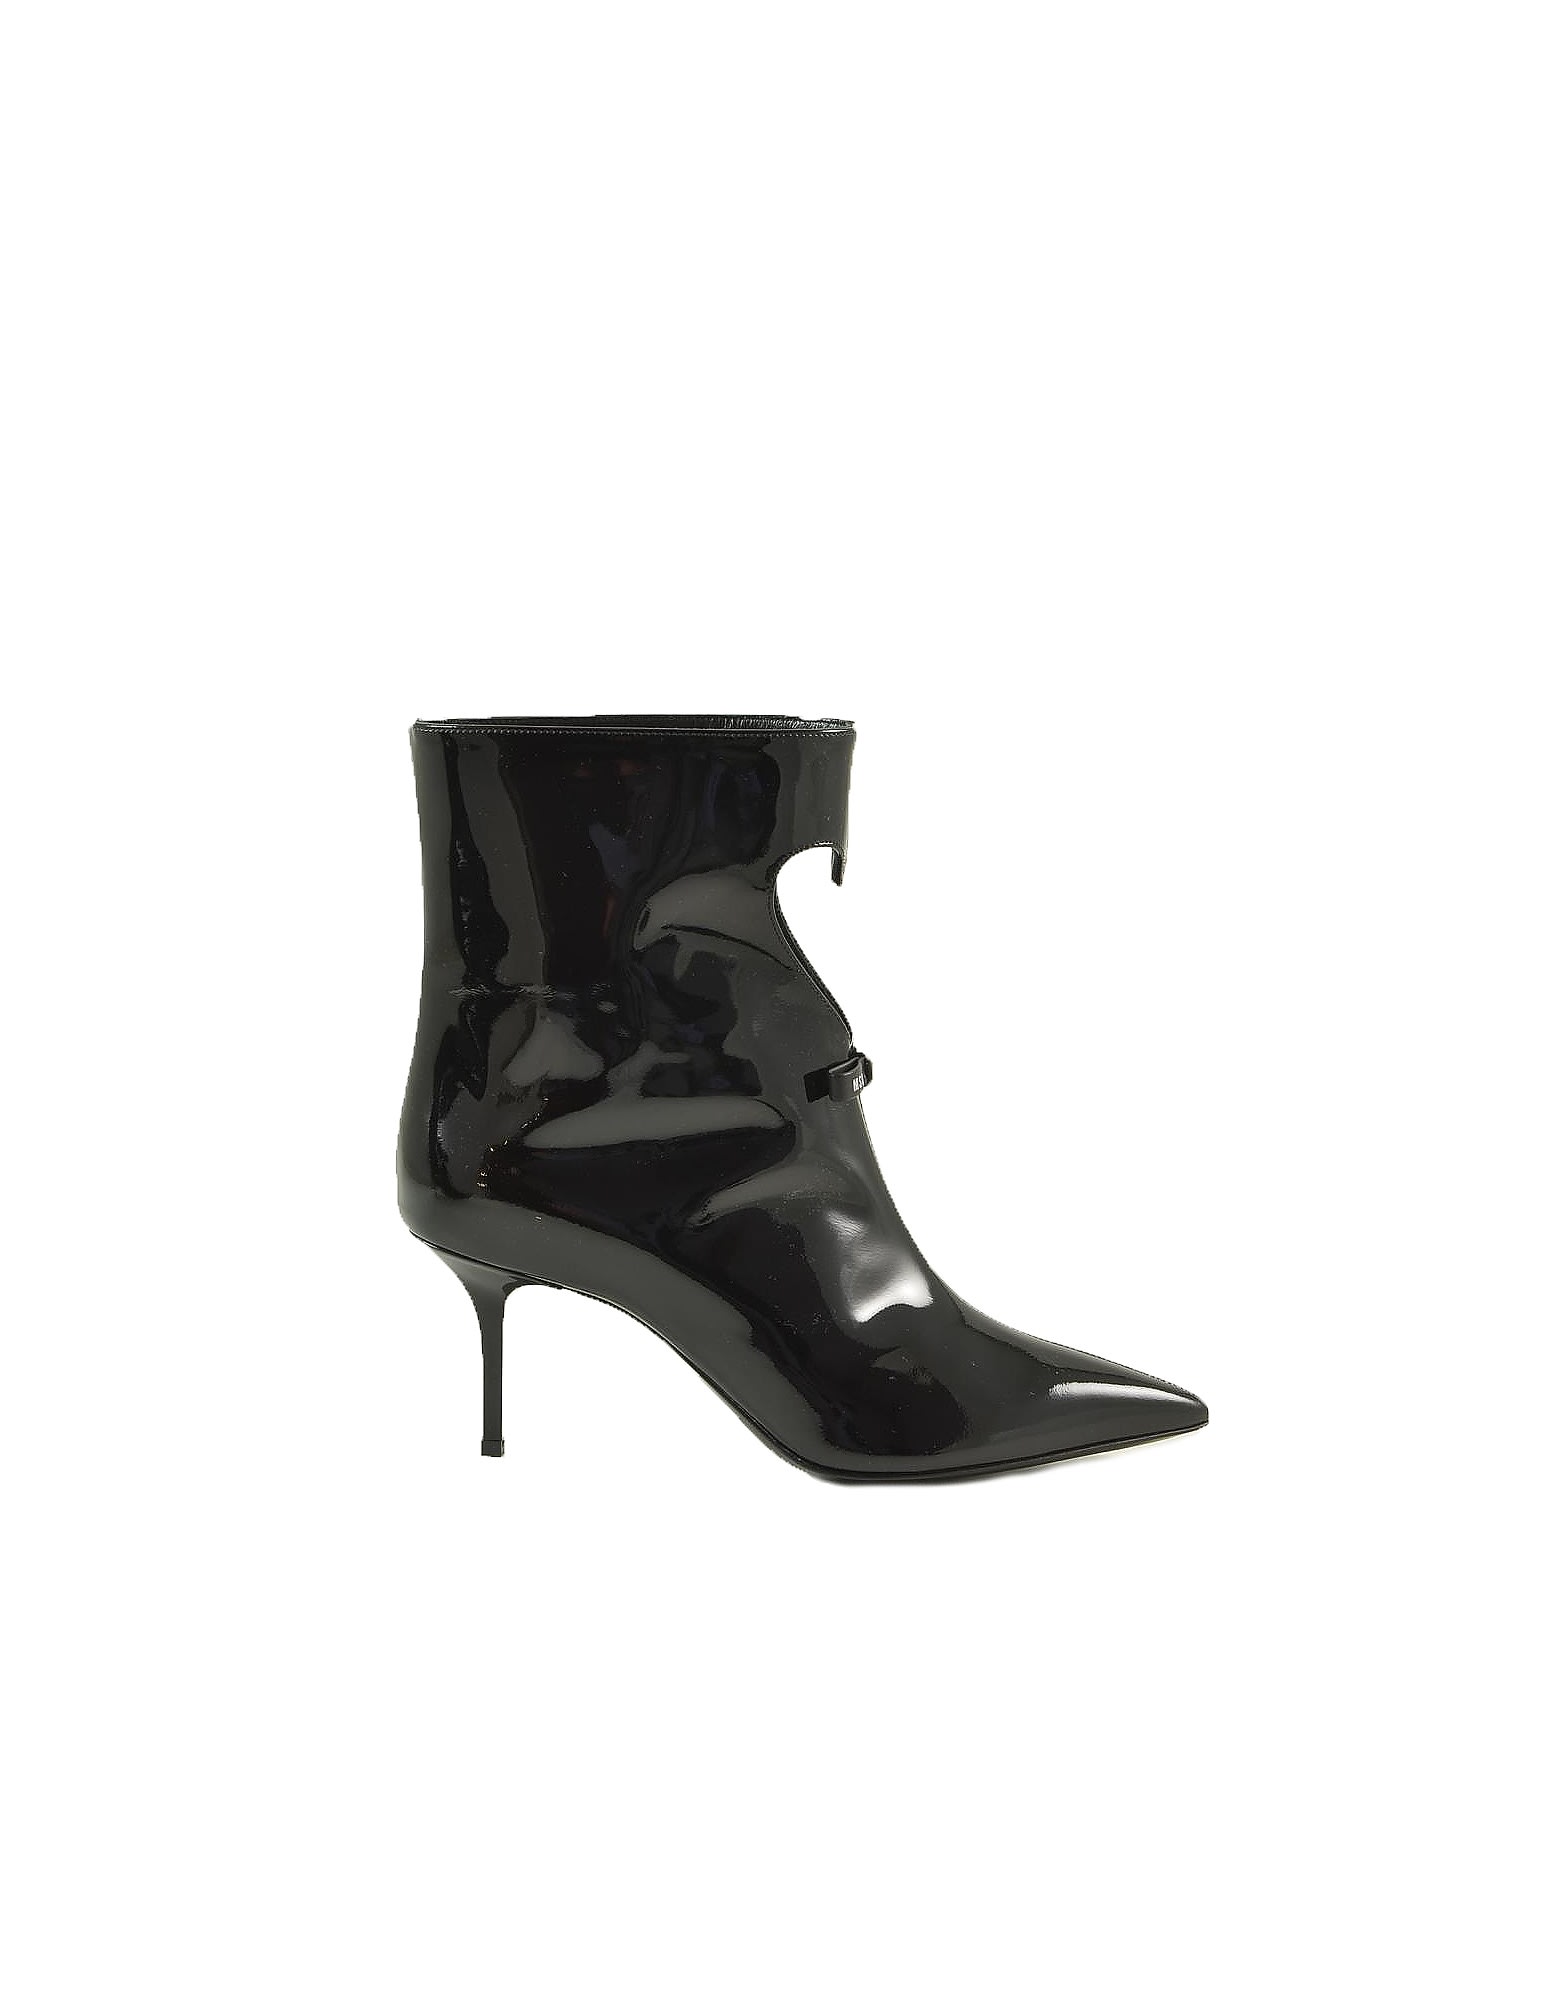 Msgm Black Patent Leather Heart-cut Booties